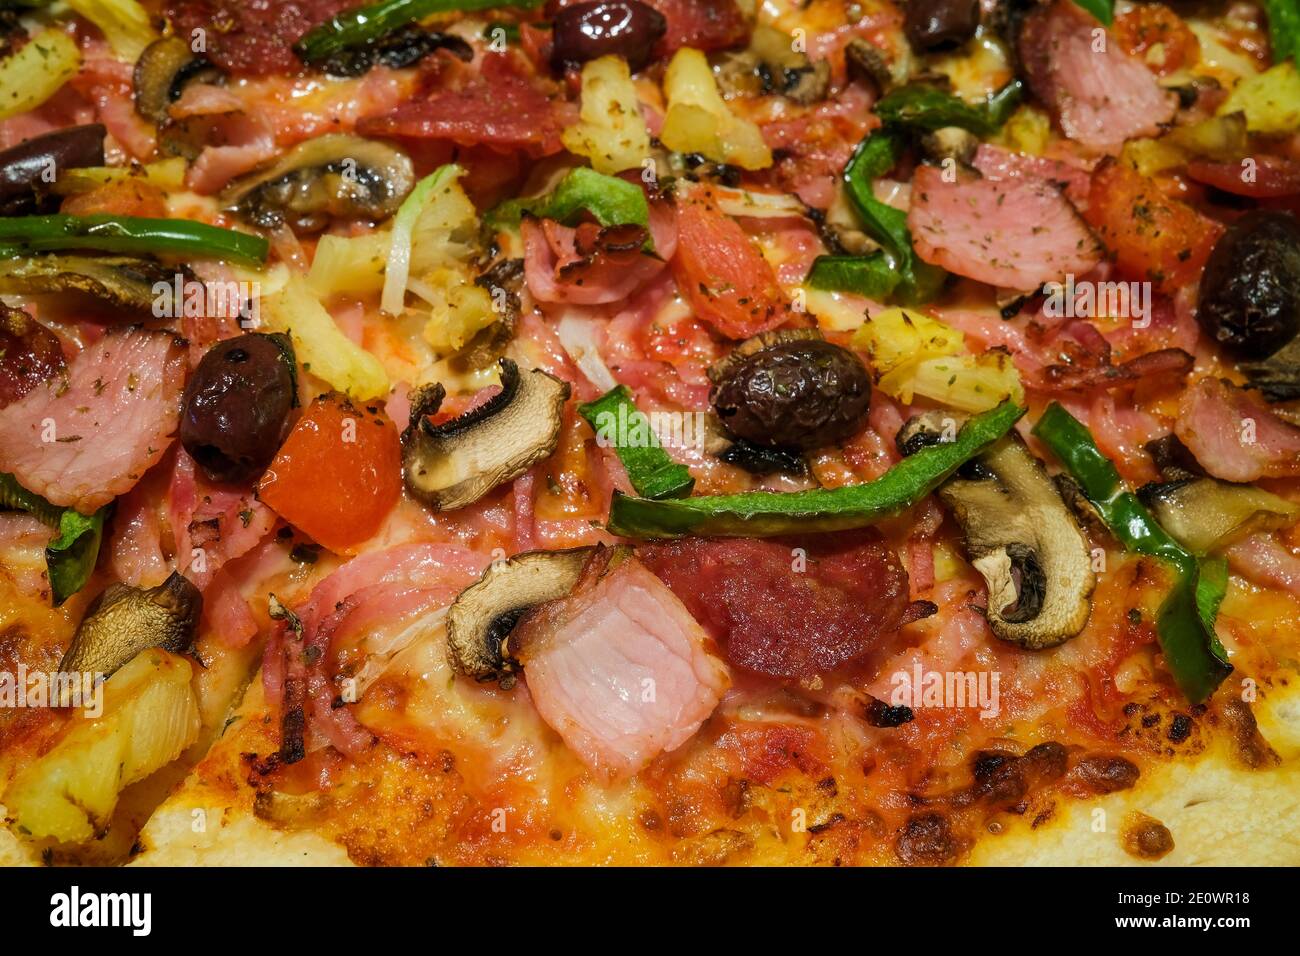 Pizza topping close-up Stock Photo